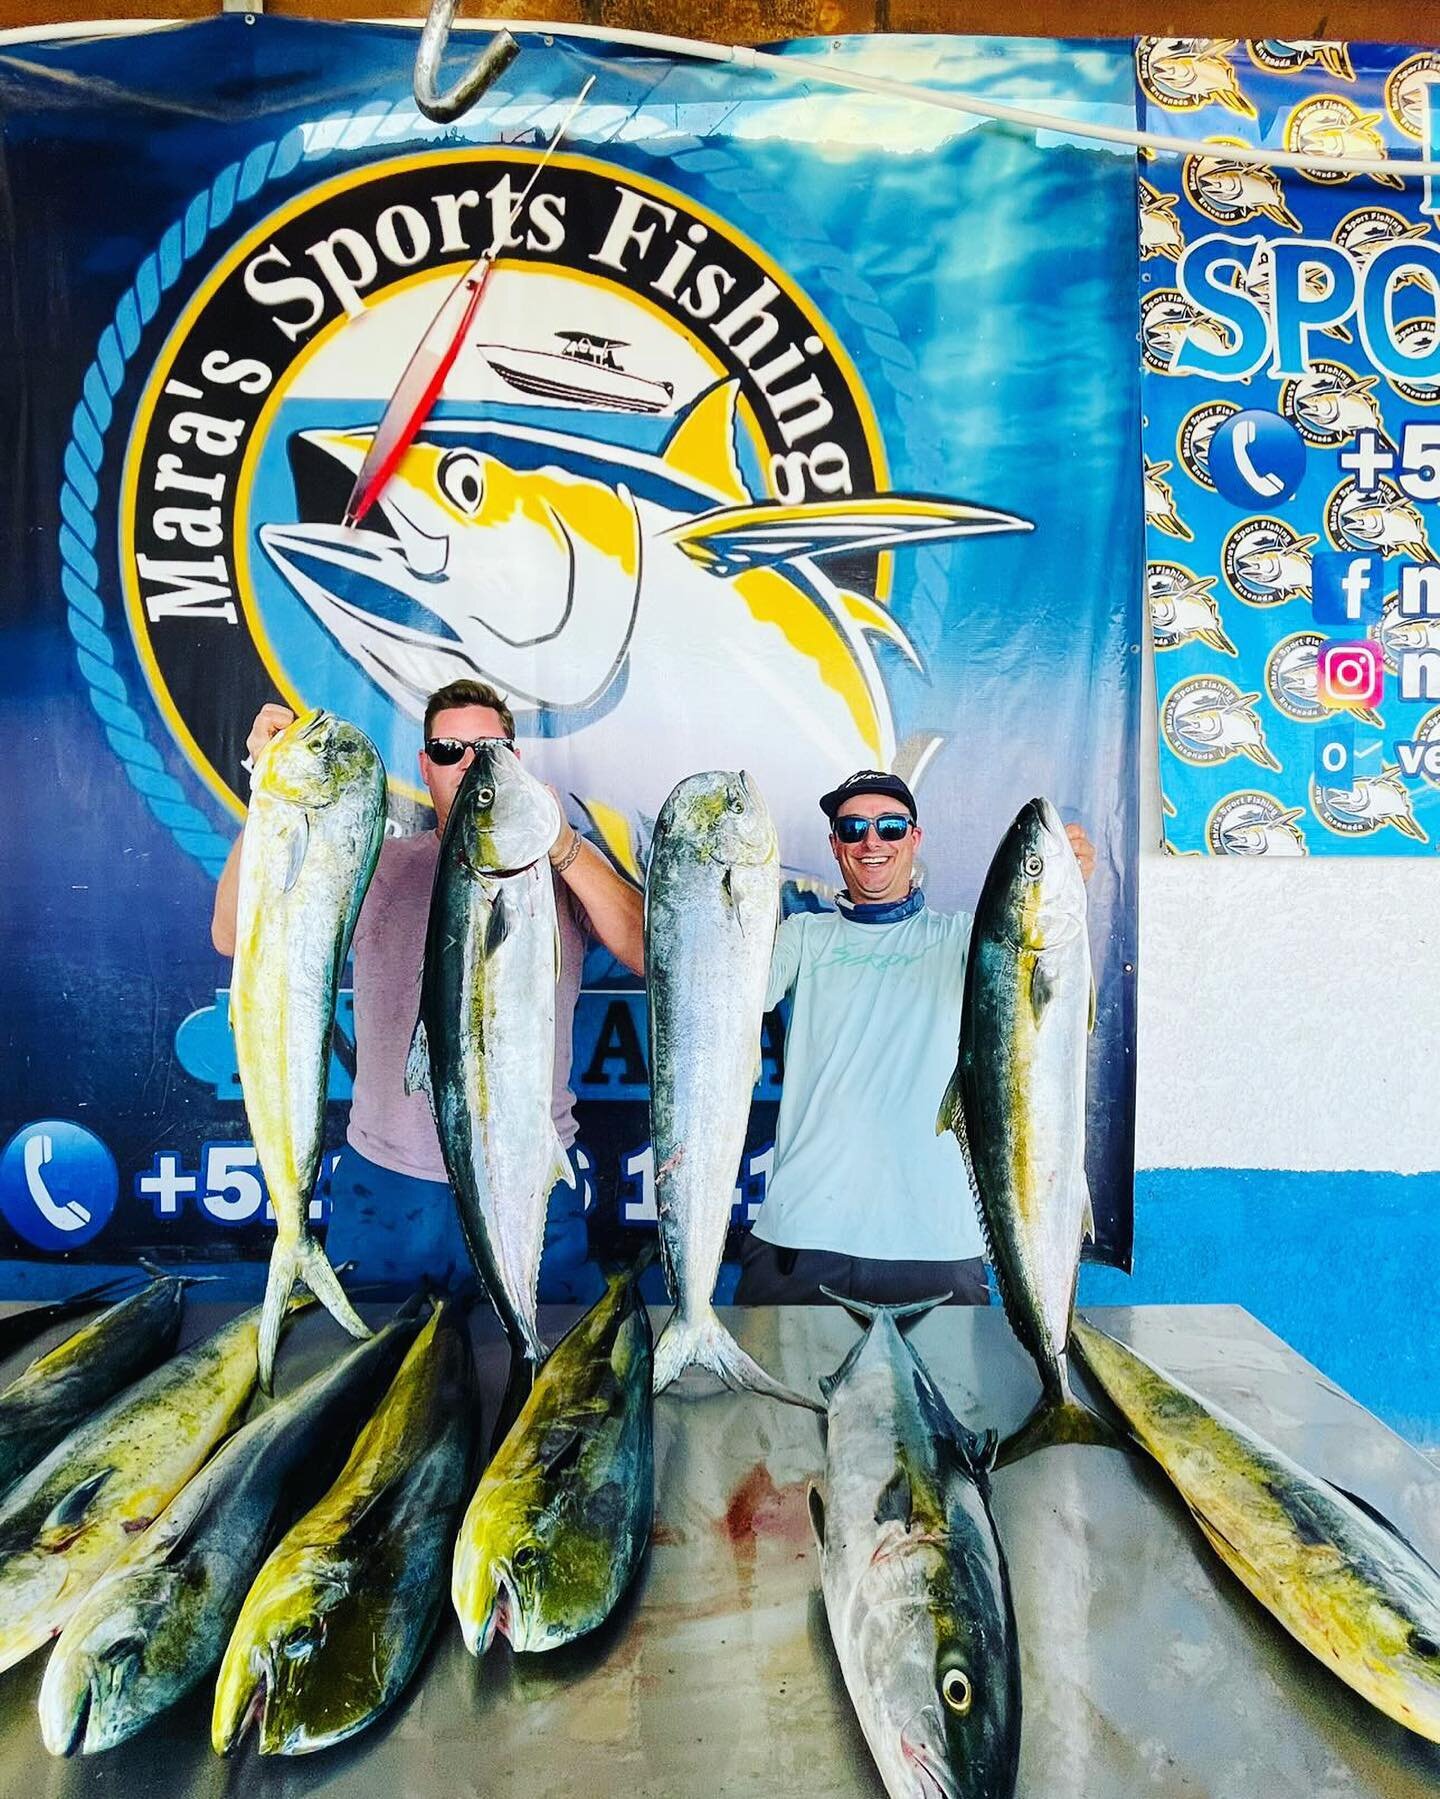 Got to sneak down and fish a wide open dorado bite with my good friend @barnabycronshaw and the @maras_sportfishing team! Epic day of dorado with a few yellowtail mixed in! We must have released over 40 fish after keeping what we could manage eating!